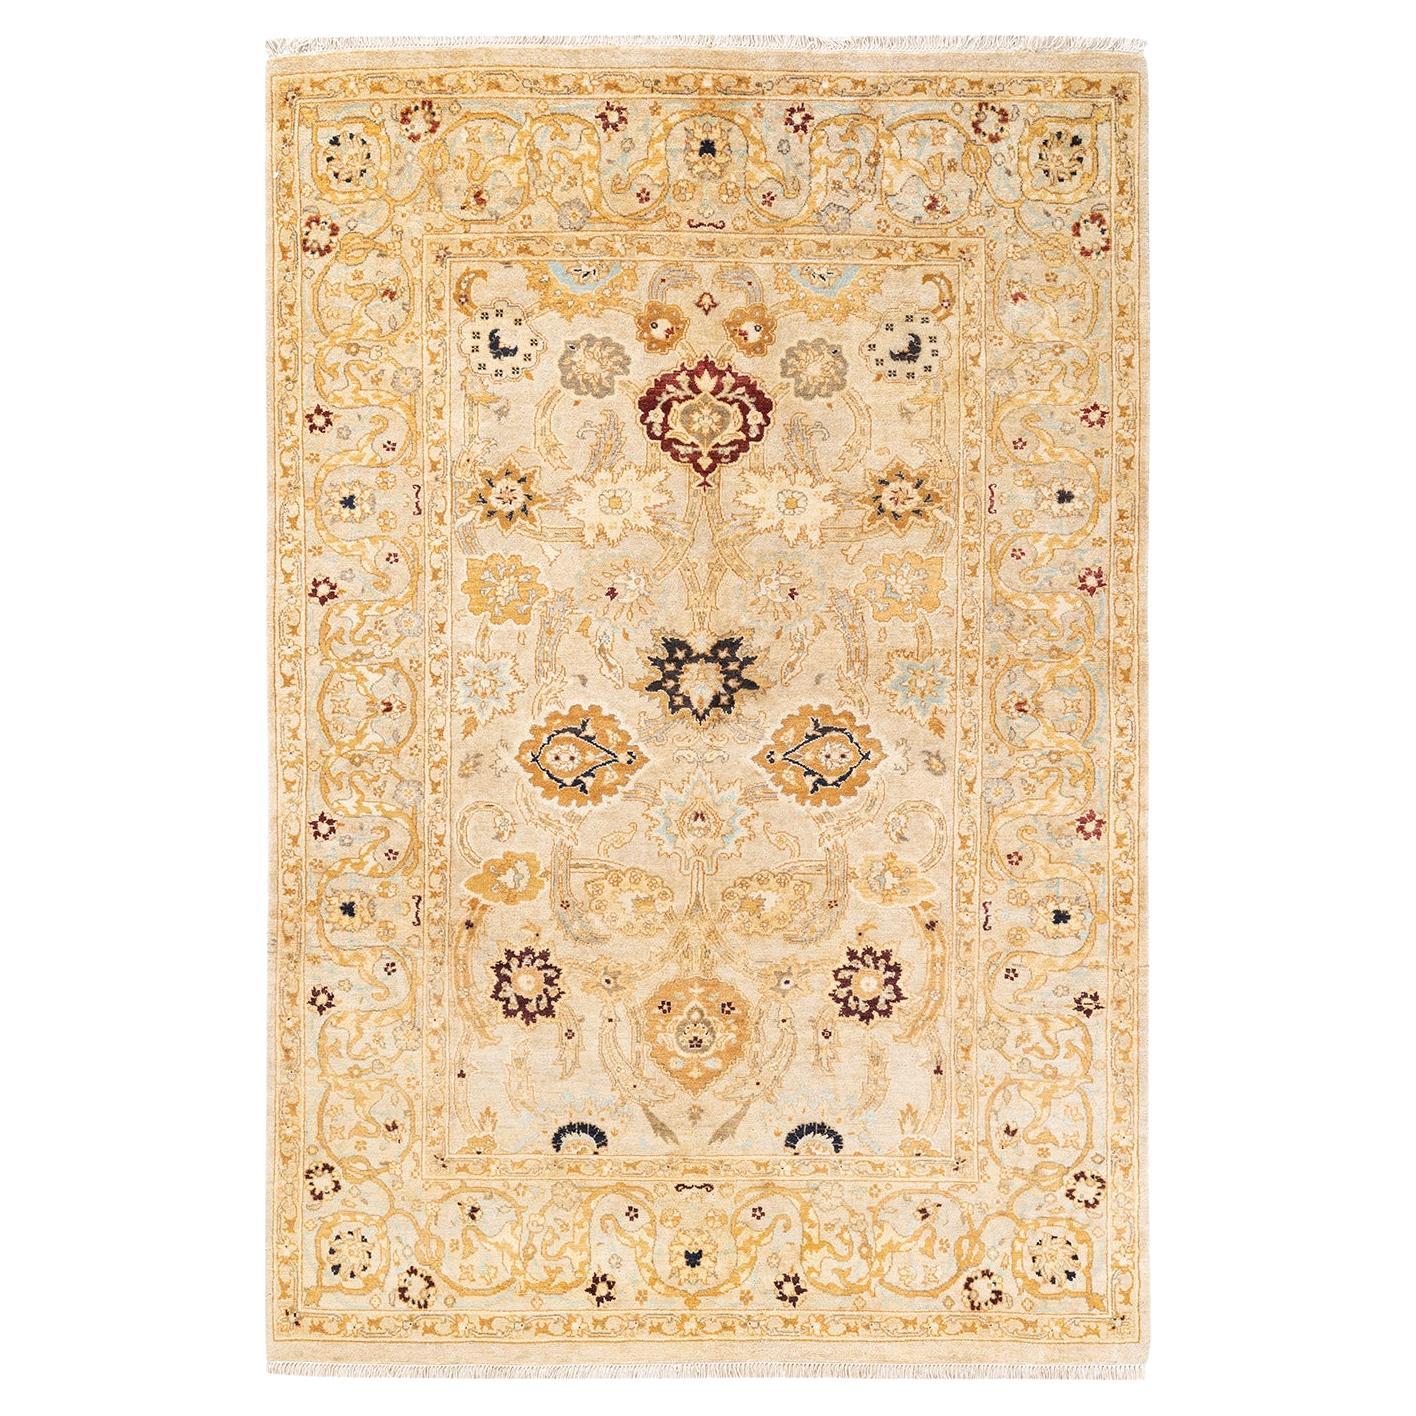 One of a Kind Hand Knotted Contemporary Oriental Eclectic Ivory Area Rug